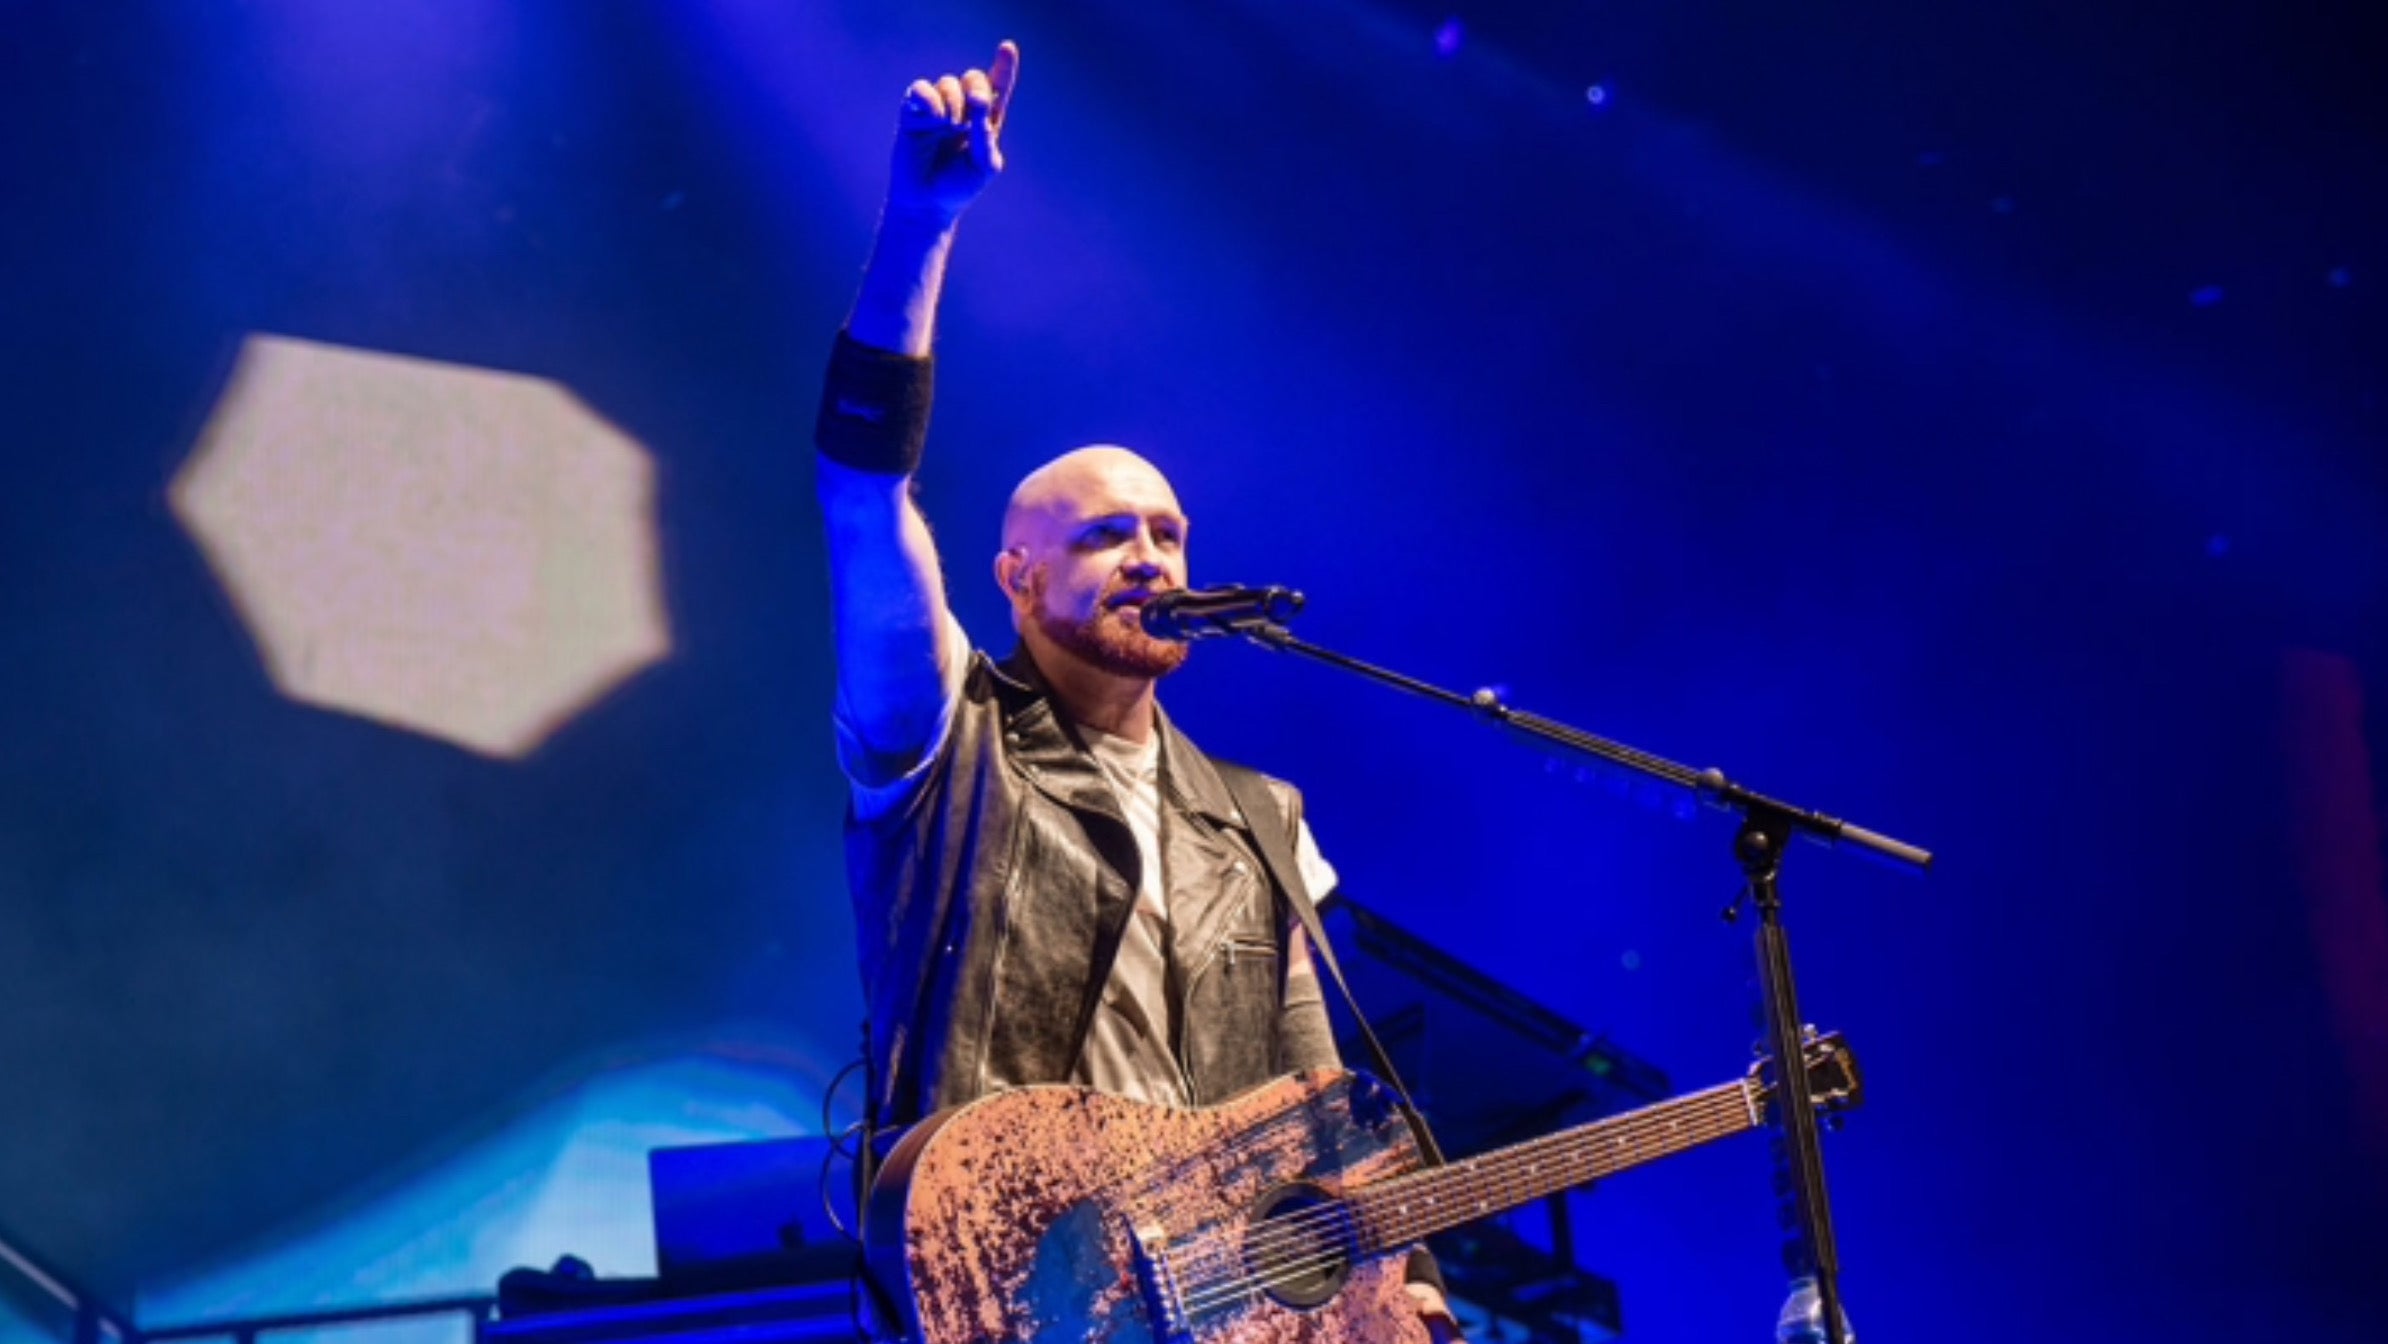 Mark Sheehan, guitarist of “The Script”, died at the age of 46, Magnate Daily